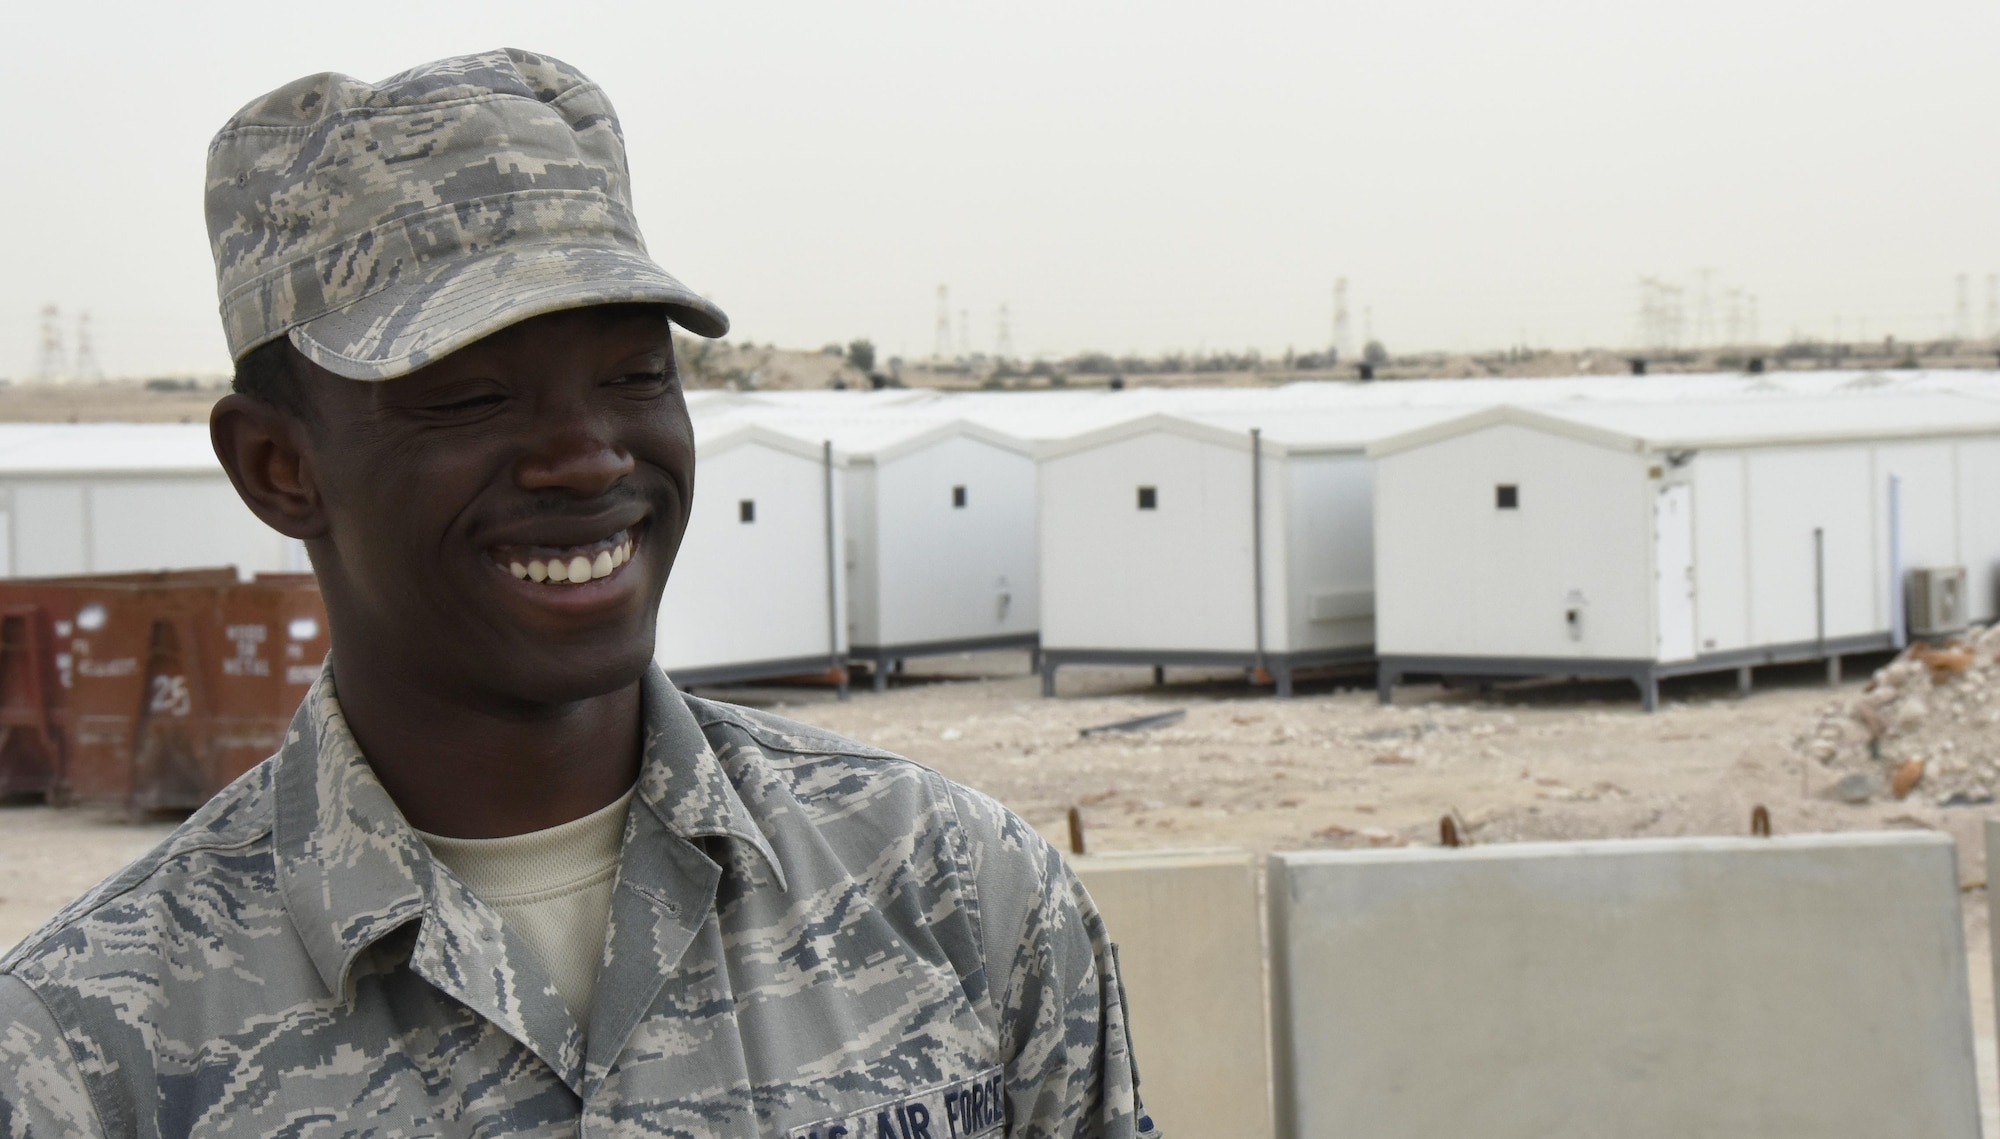 U.S. Air Force Tech. Sgt. Dominique Knowles, project manager with the 379th Expeditionary Civil Engineer Squadron Water and Fuels Section, poses for a photo at Al Udeid Air Base, Qatar, March 15, 2017. Knowles is the project manager for the replacement portion of the 379th ECES cadillac trailer plan, one part of the continued improvement of facilities at Al Udeid AB. (U.S. Air Force photo by Senior Airman Cynthia A. Innocenti)